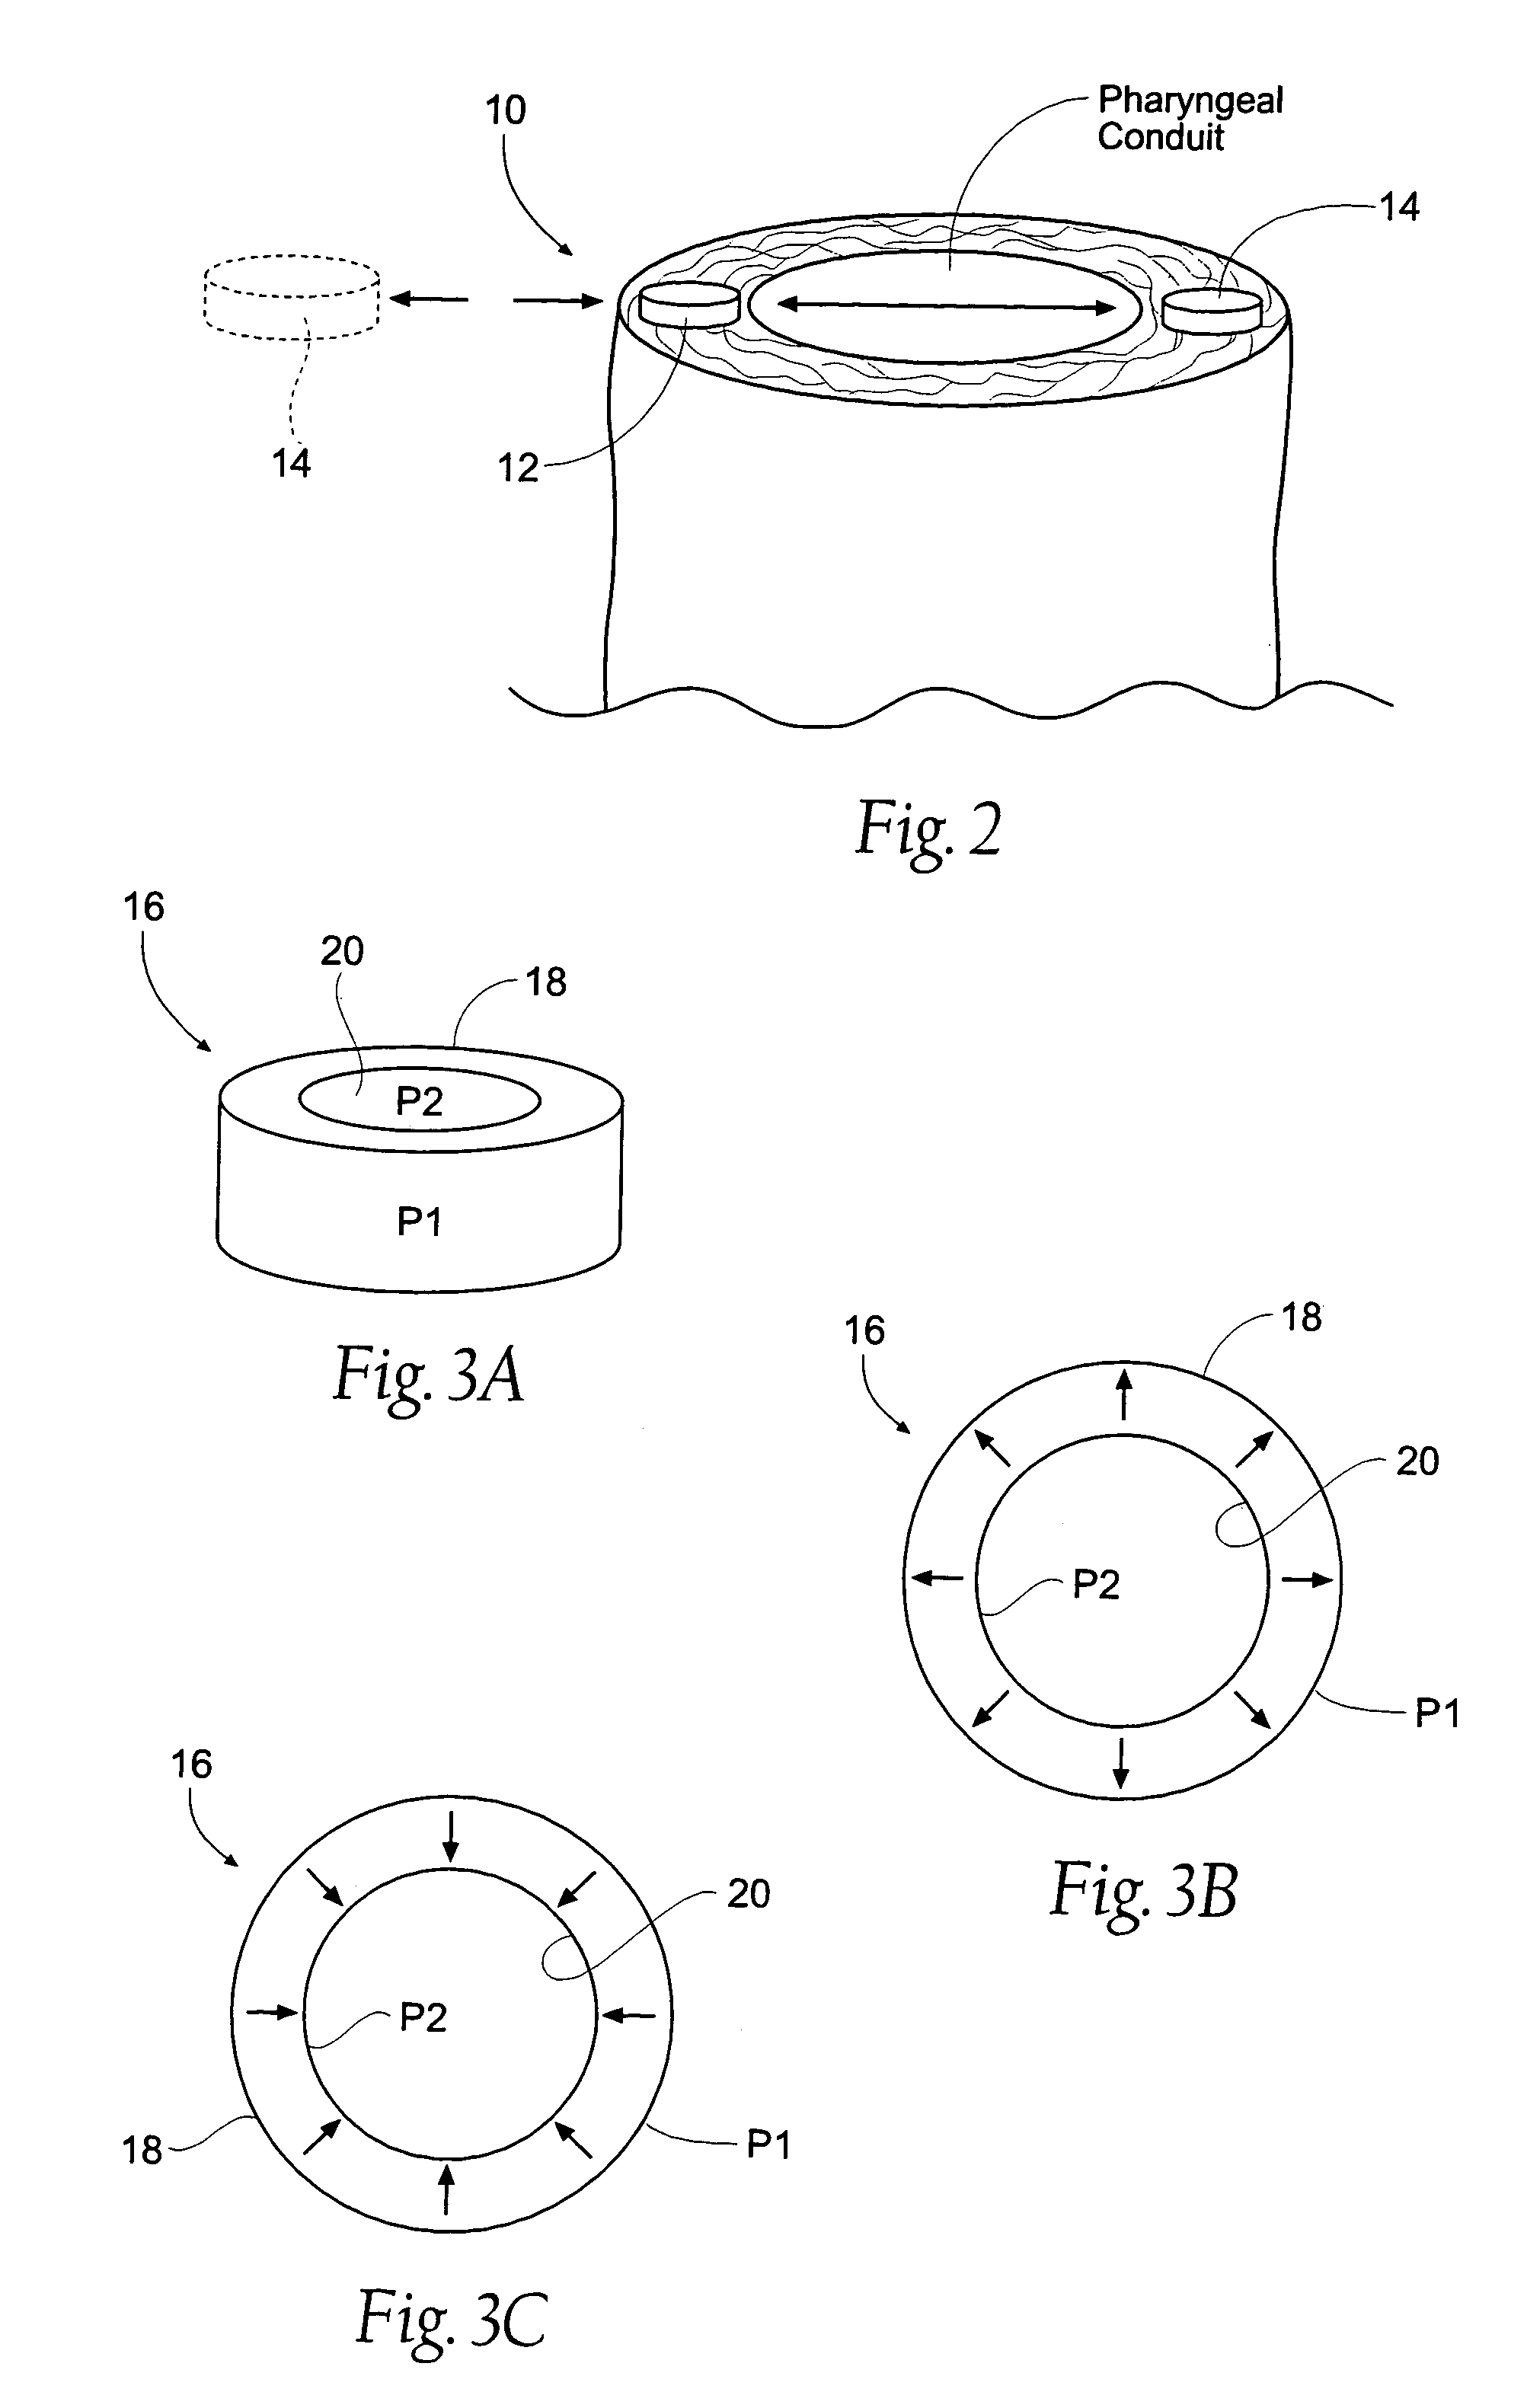 Magnetic force devices, systems, and methods for resisting tissue collapse within the pharyngeal conduit